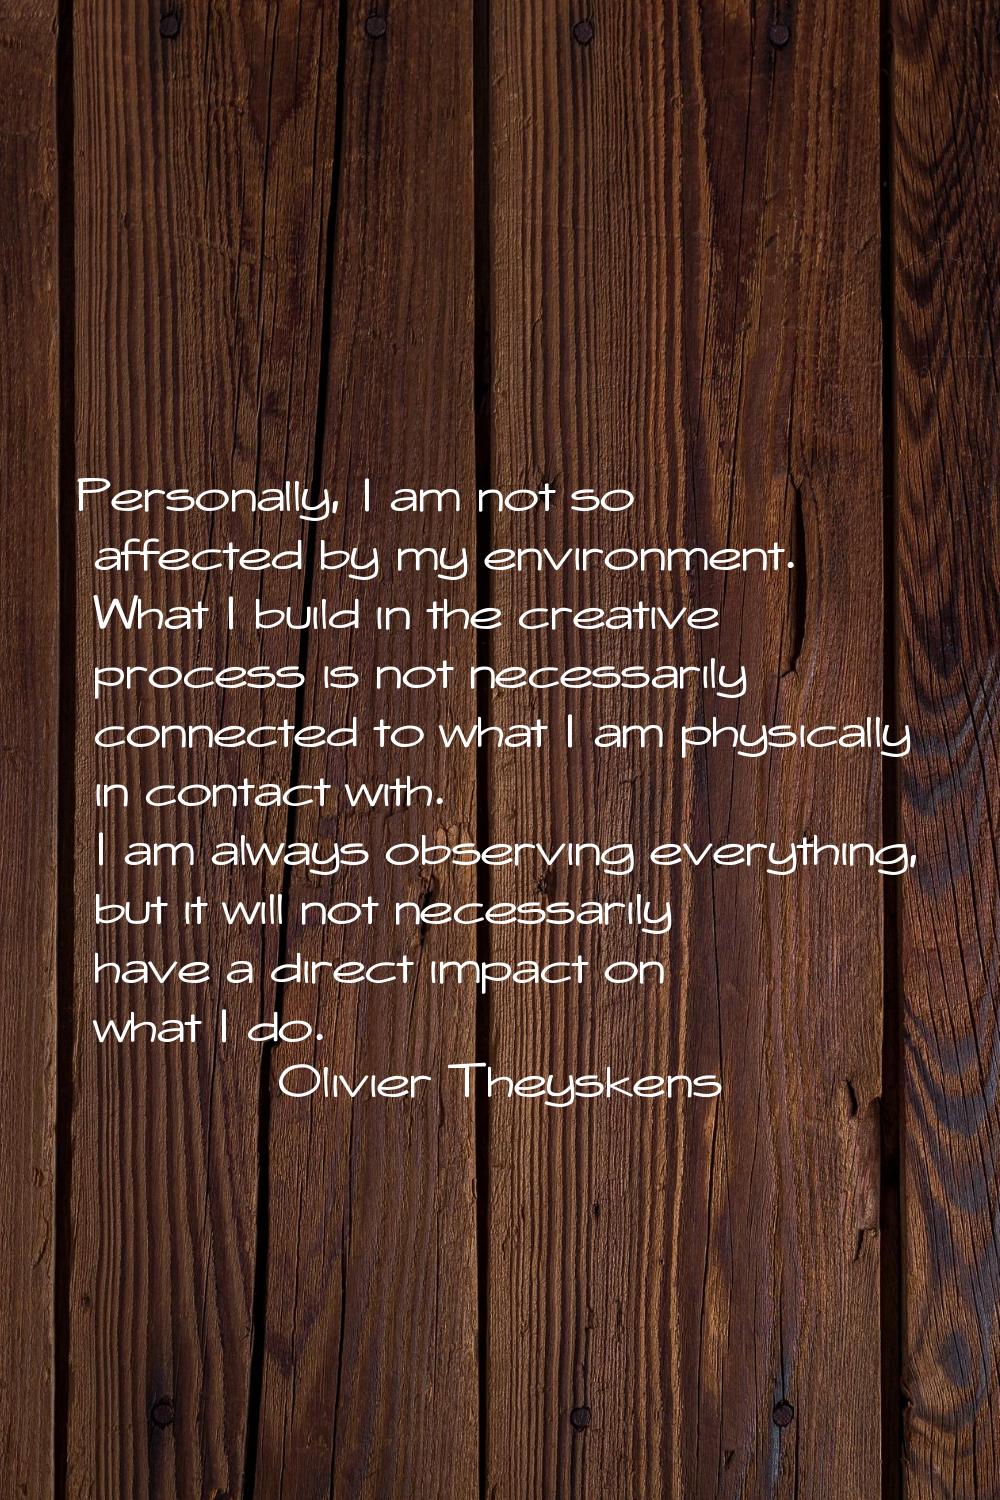 Personally, I am not so affected by my environment. What I build in the creative process is not nec